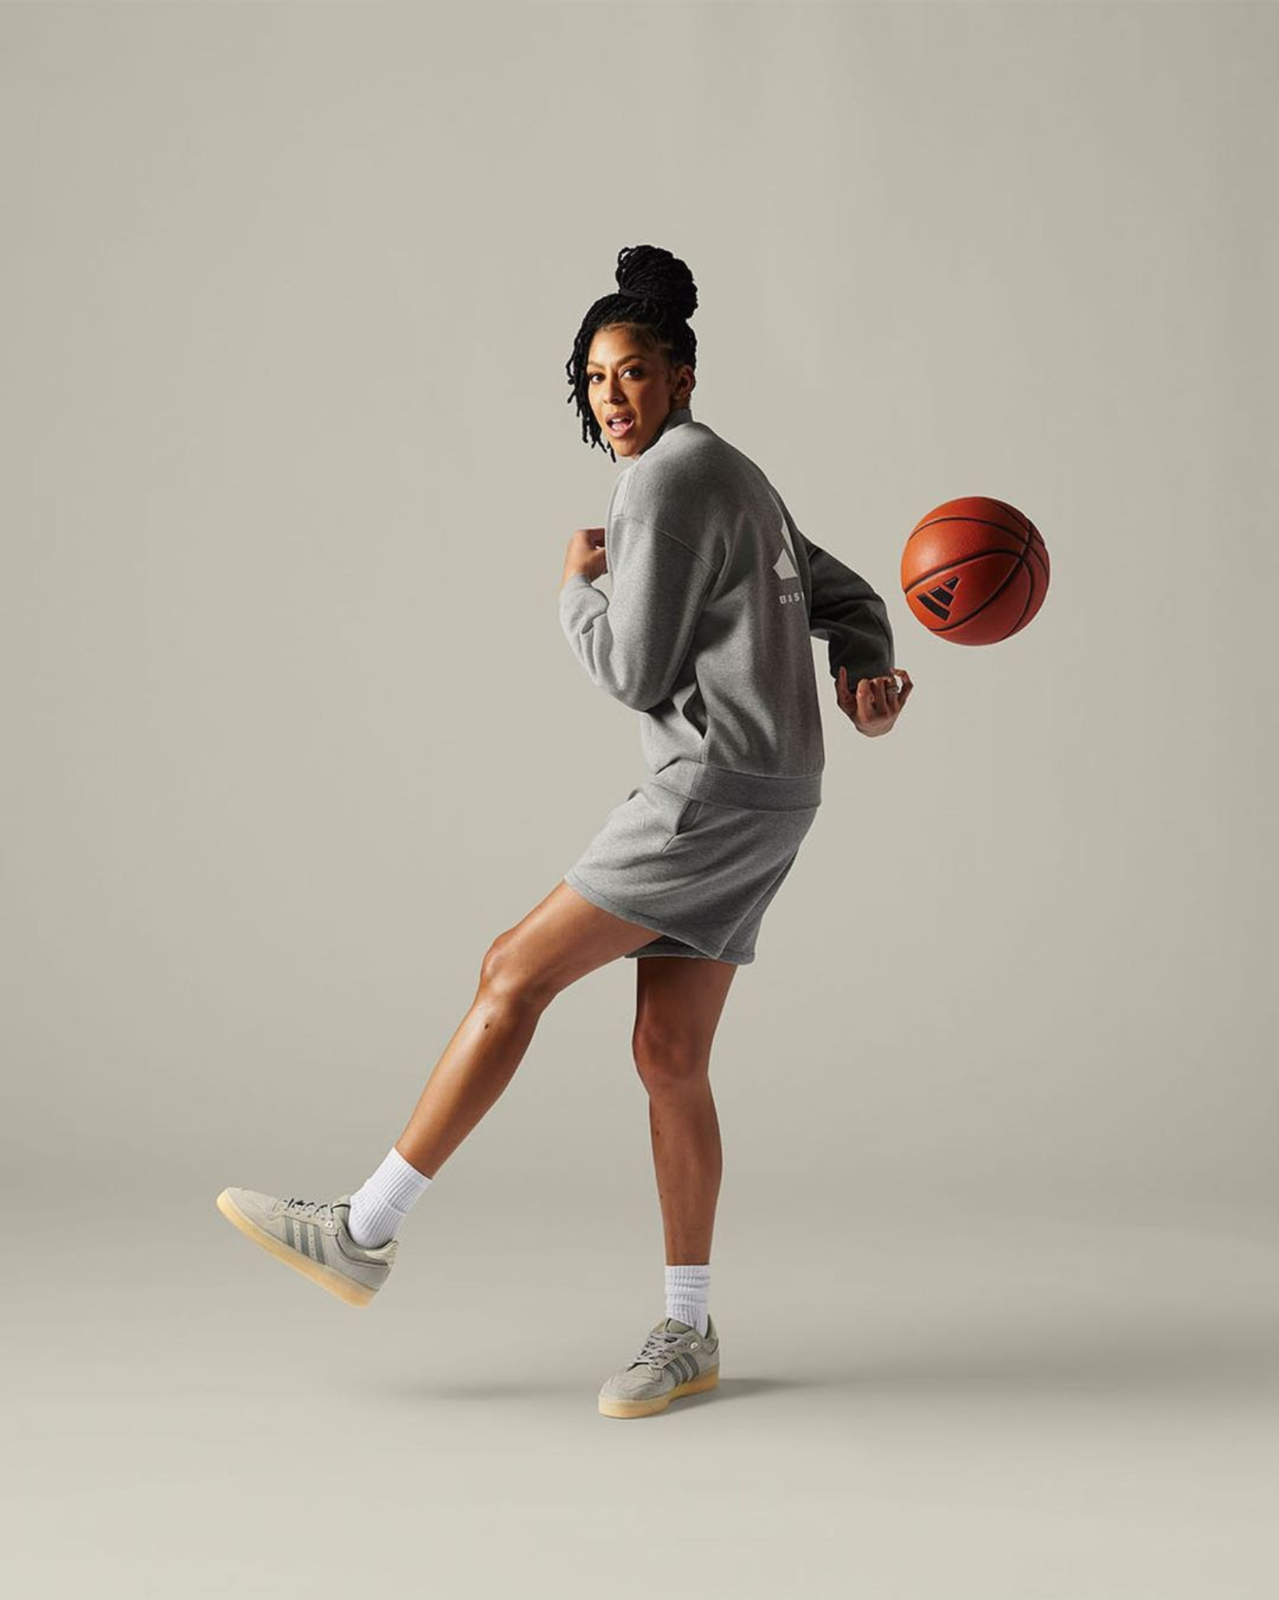 Candace Parker in adidas Basketball